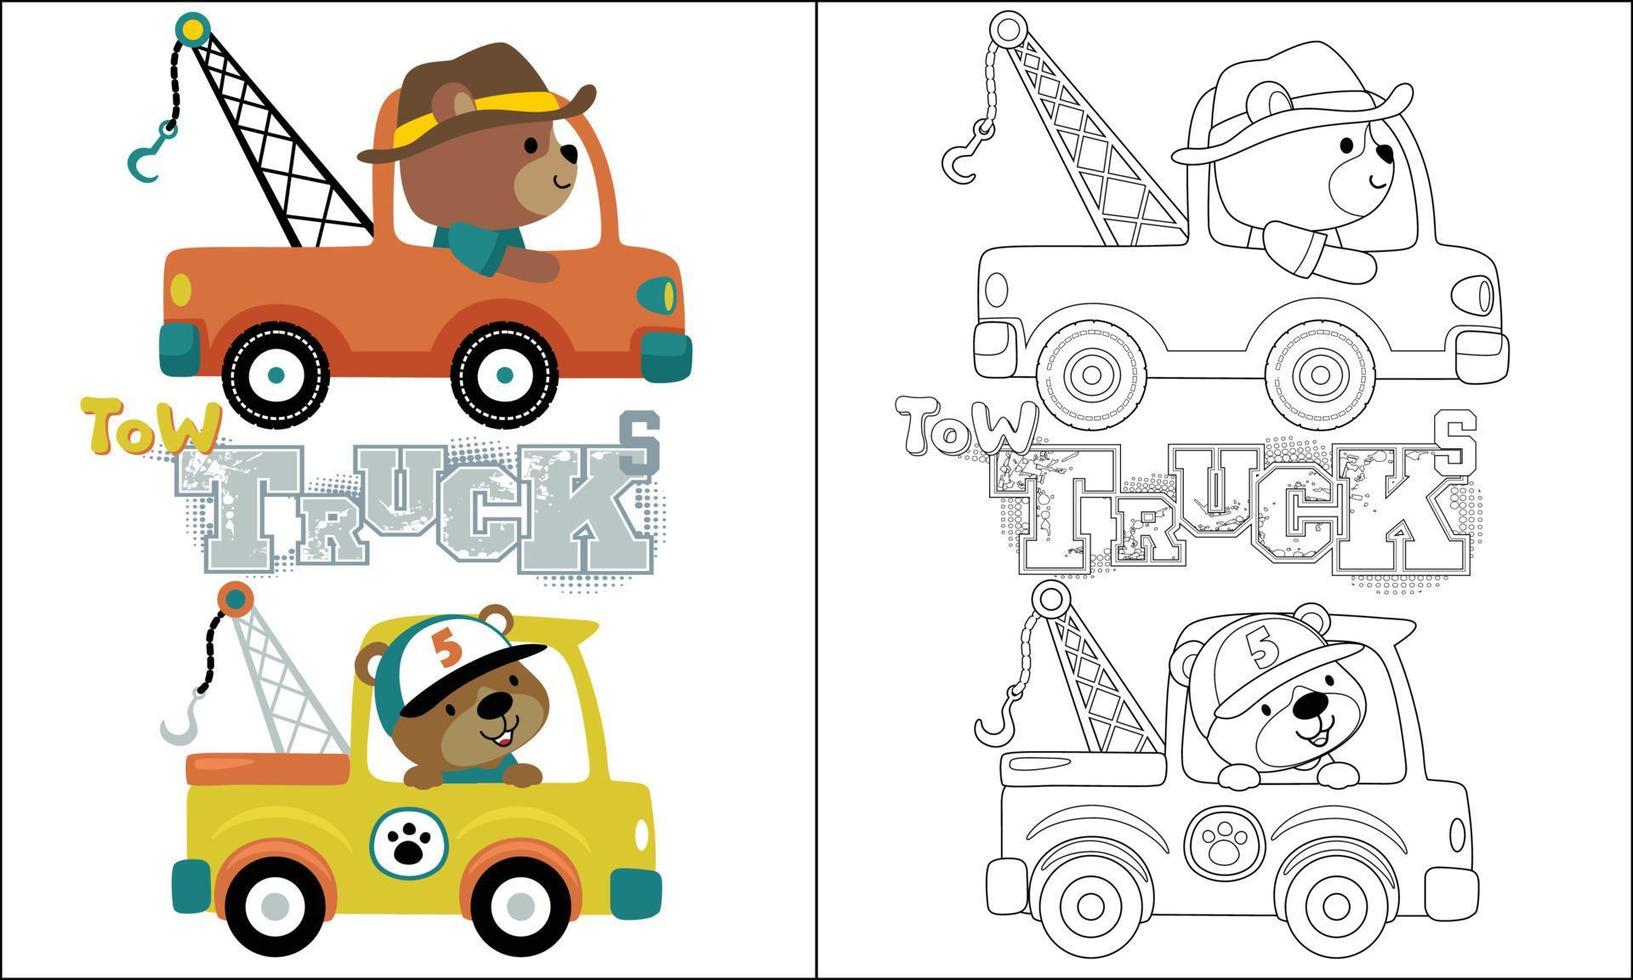 coloring book of funny bear driving tow truck, vector cartoon illustration